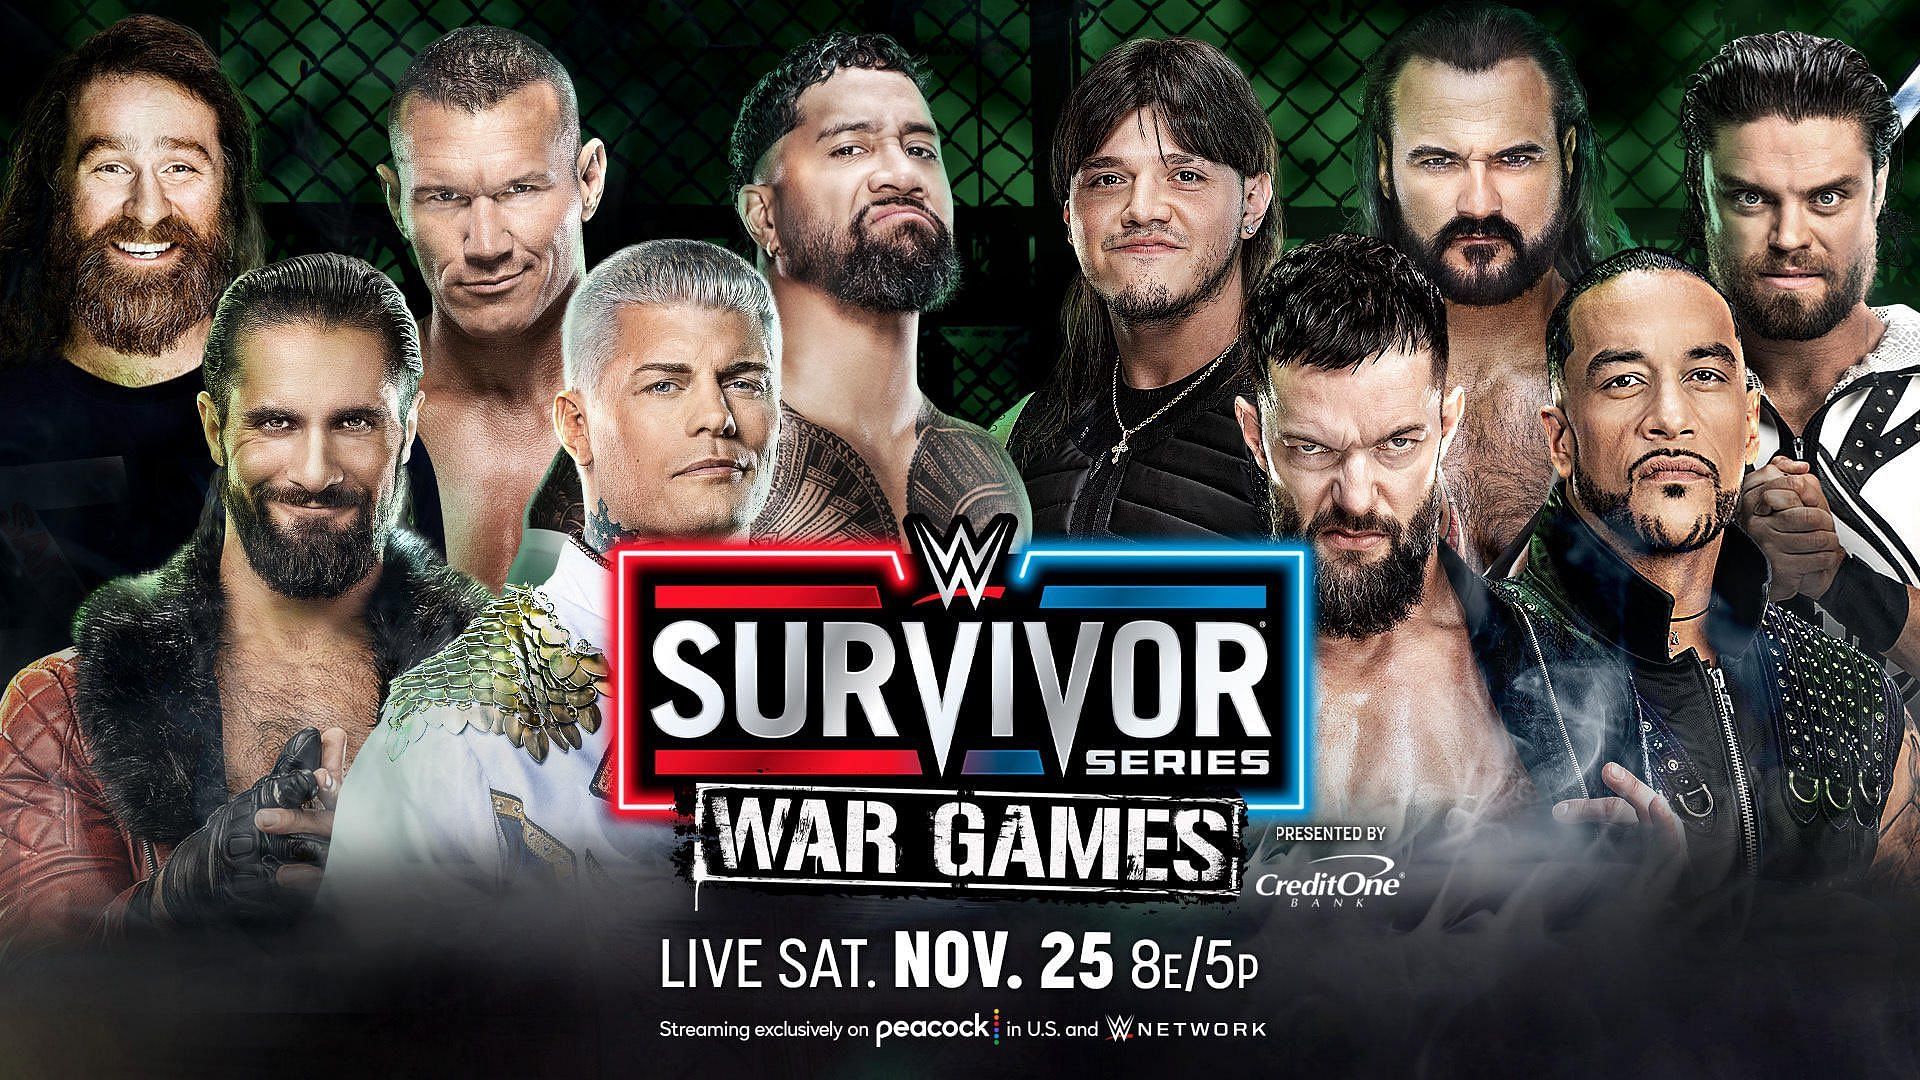 Cody Rhodes and his team will take on The Judgment Day and Drew McIntyre at Survivor Series